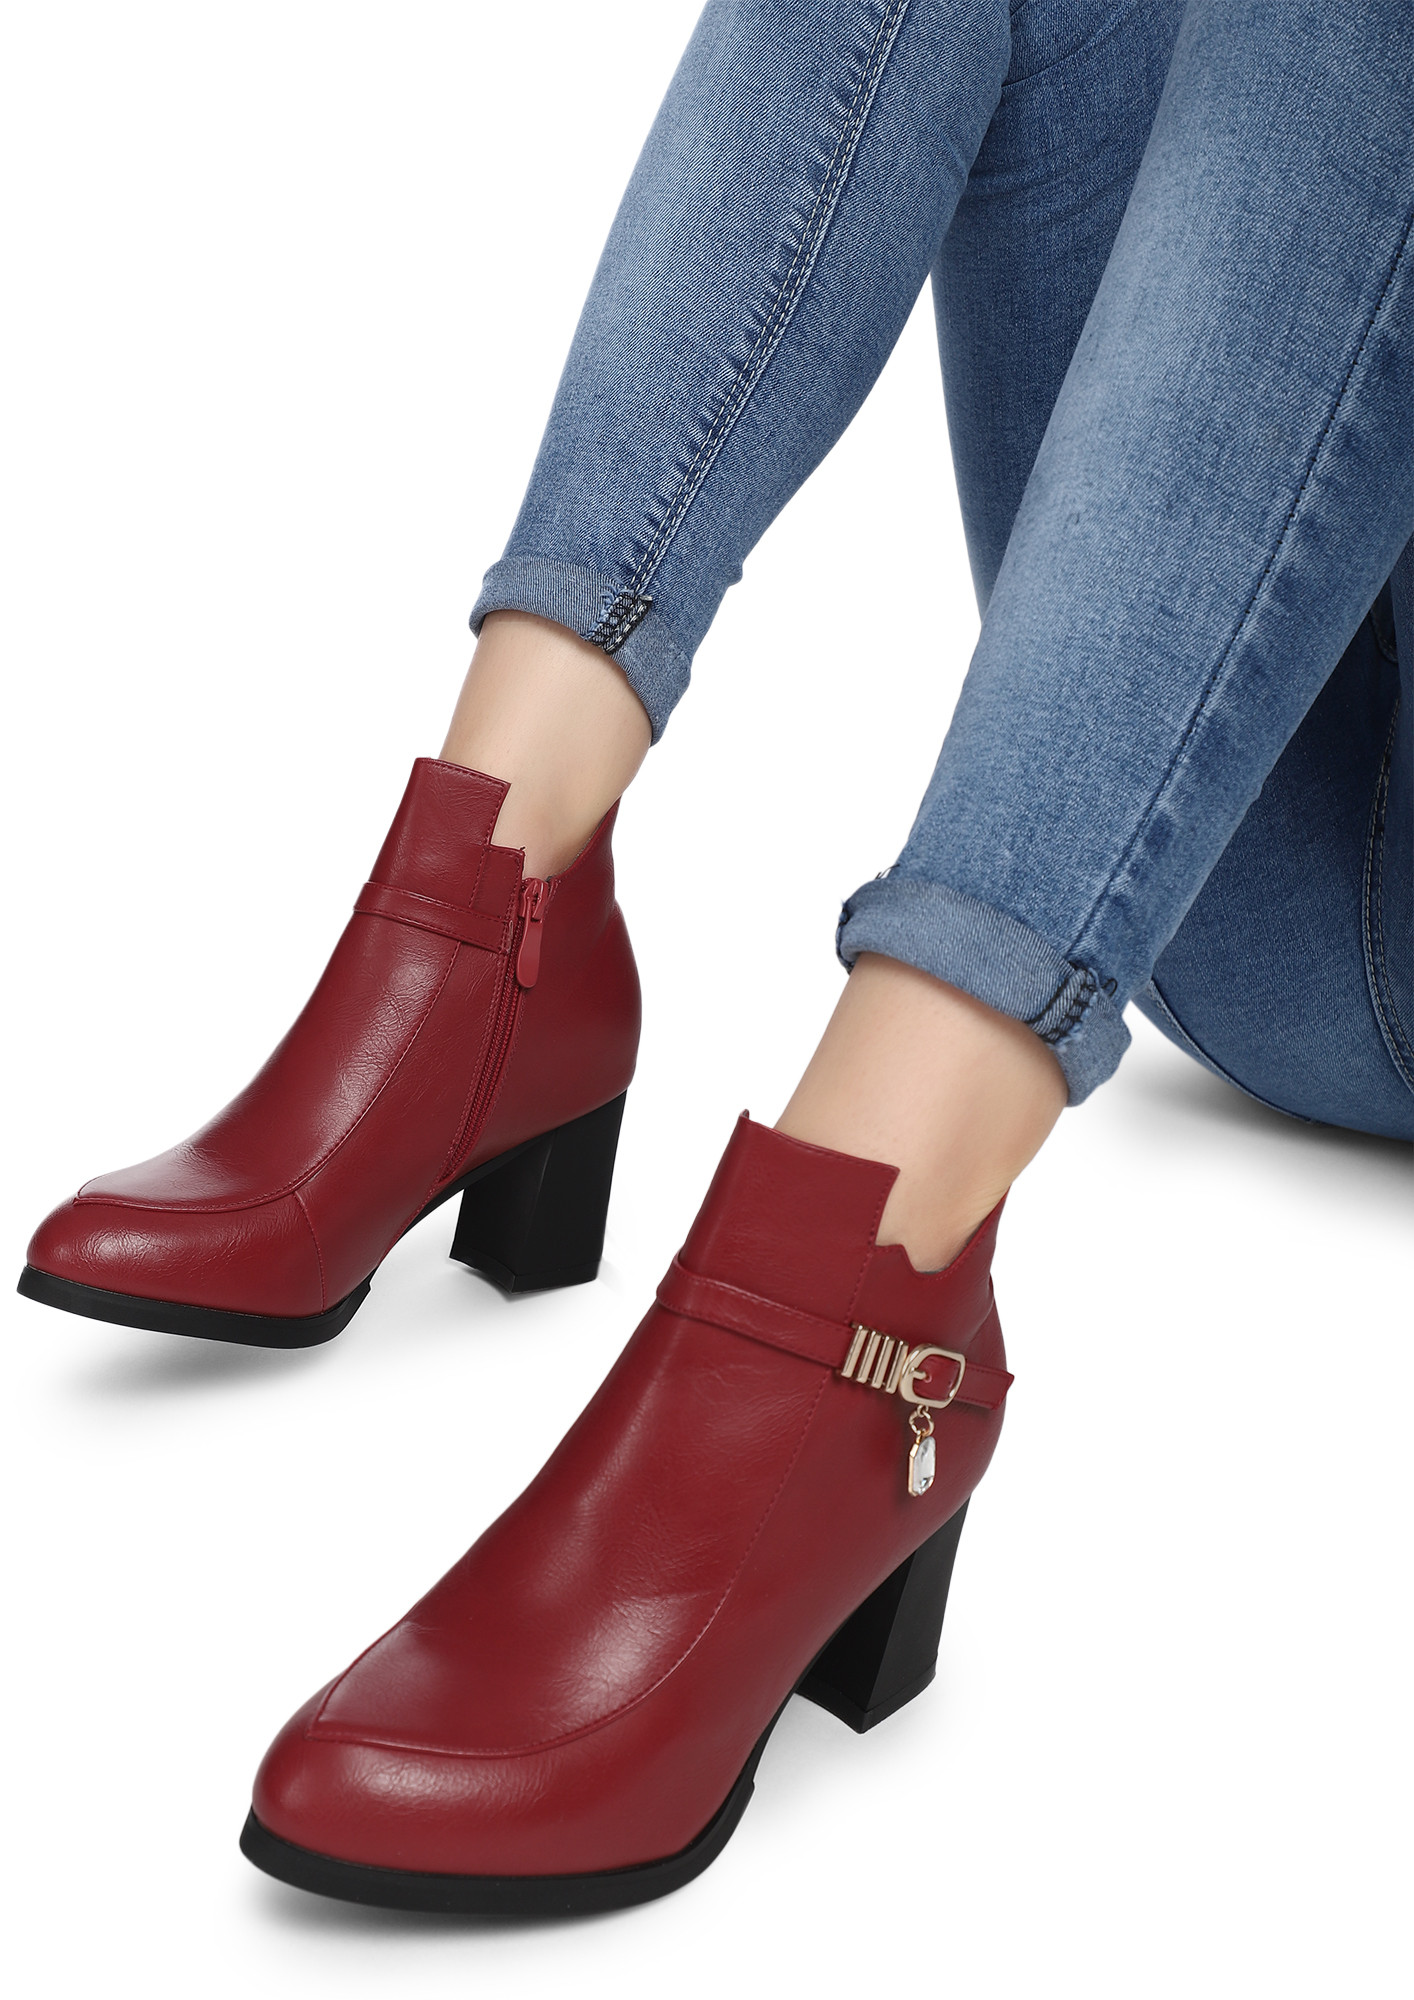 FRIDAY FEEL ON MAROON ANKLE BOOTS